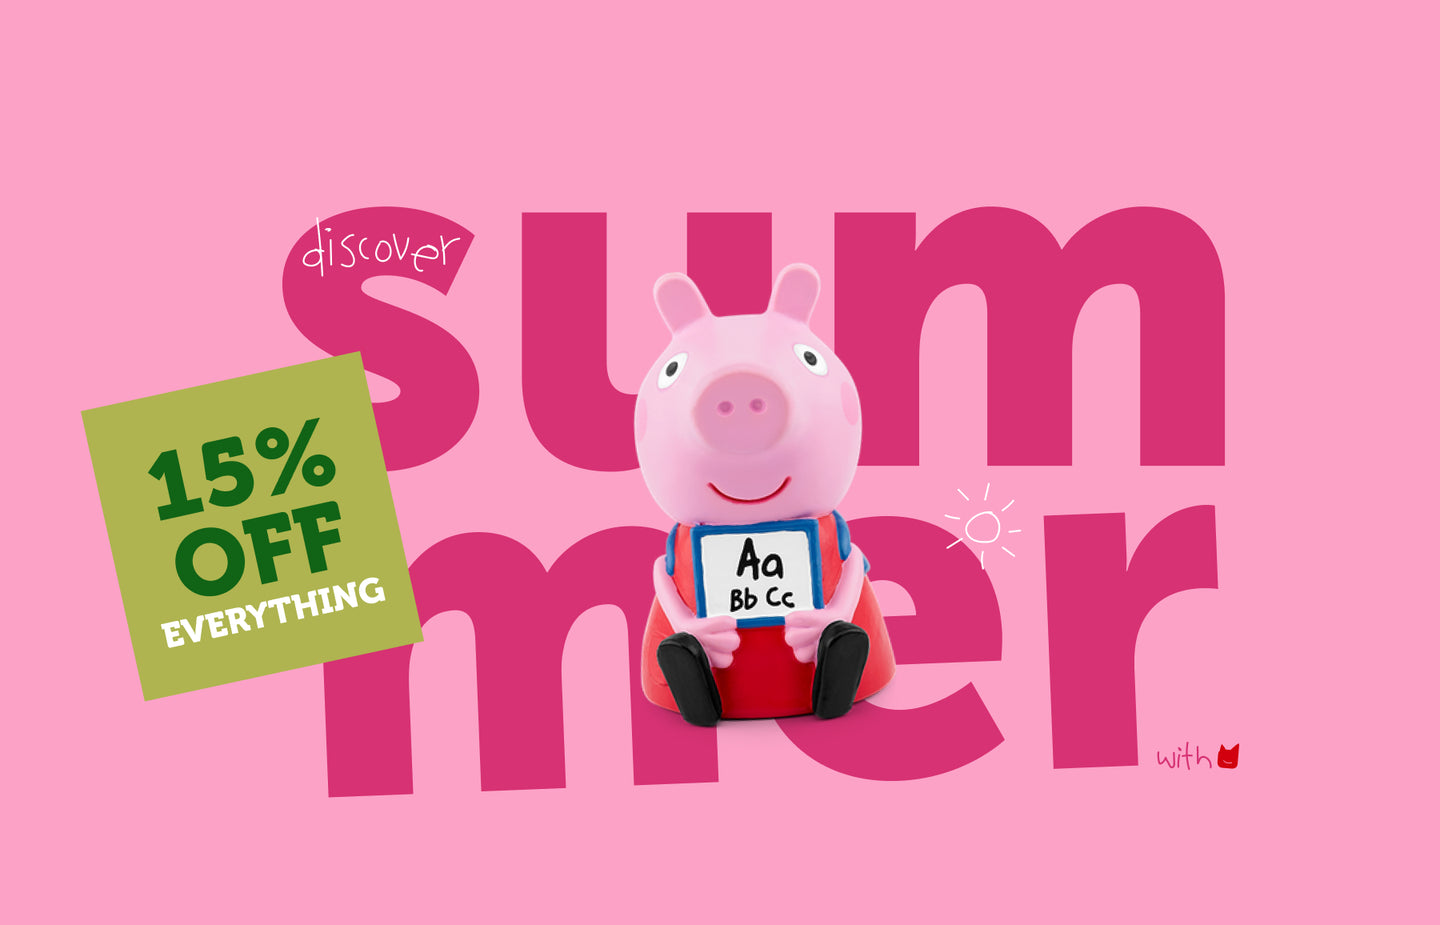 peppa pig learn with peppa tonie with Summer 15% off everything background